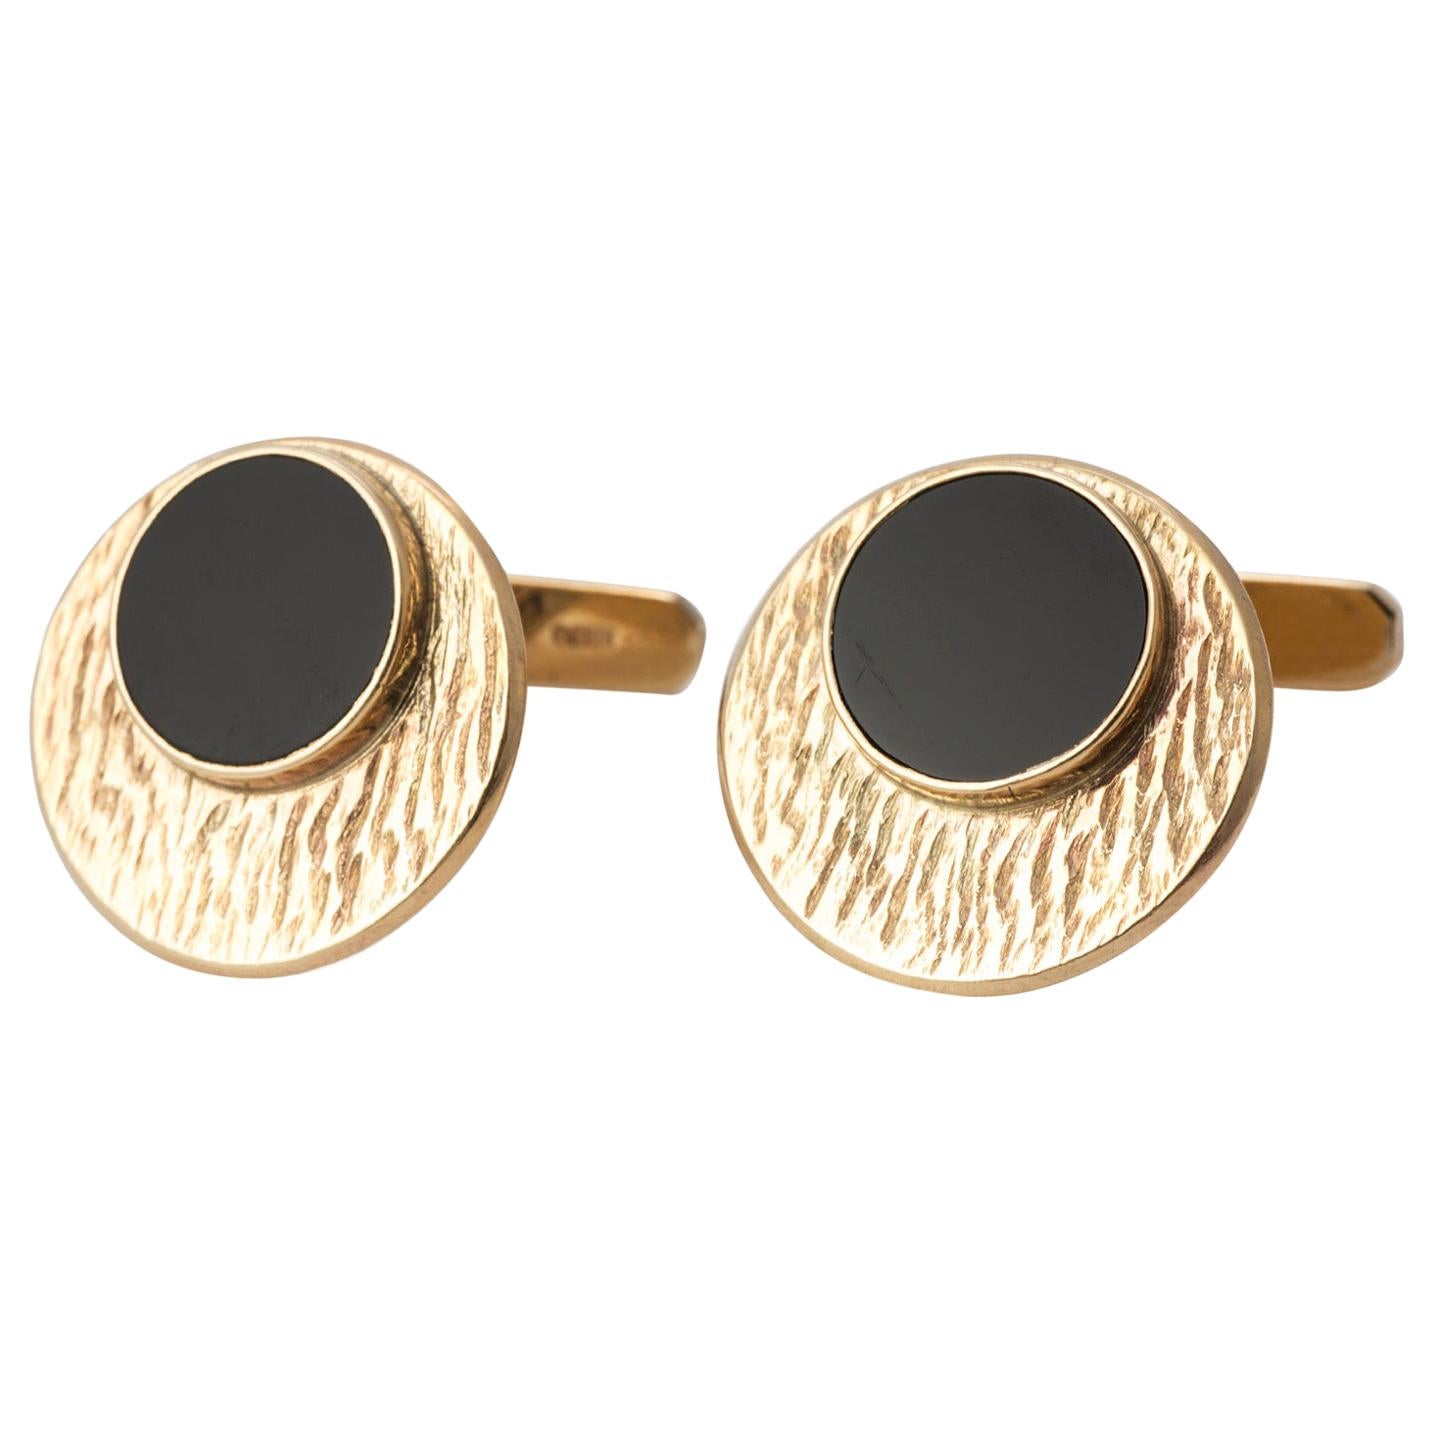 Modernist Onyx and Textured Swilink 9 Carat Gold Cuff Links